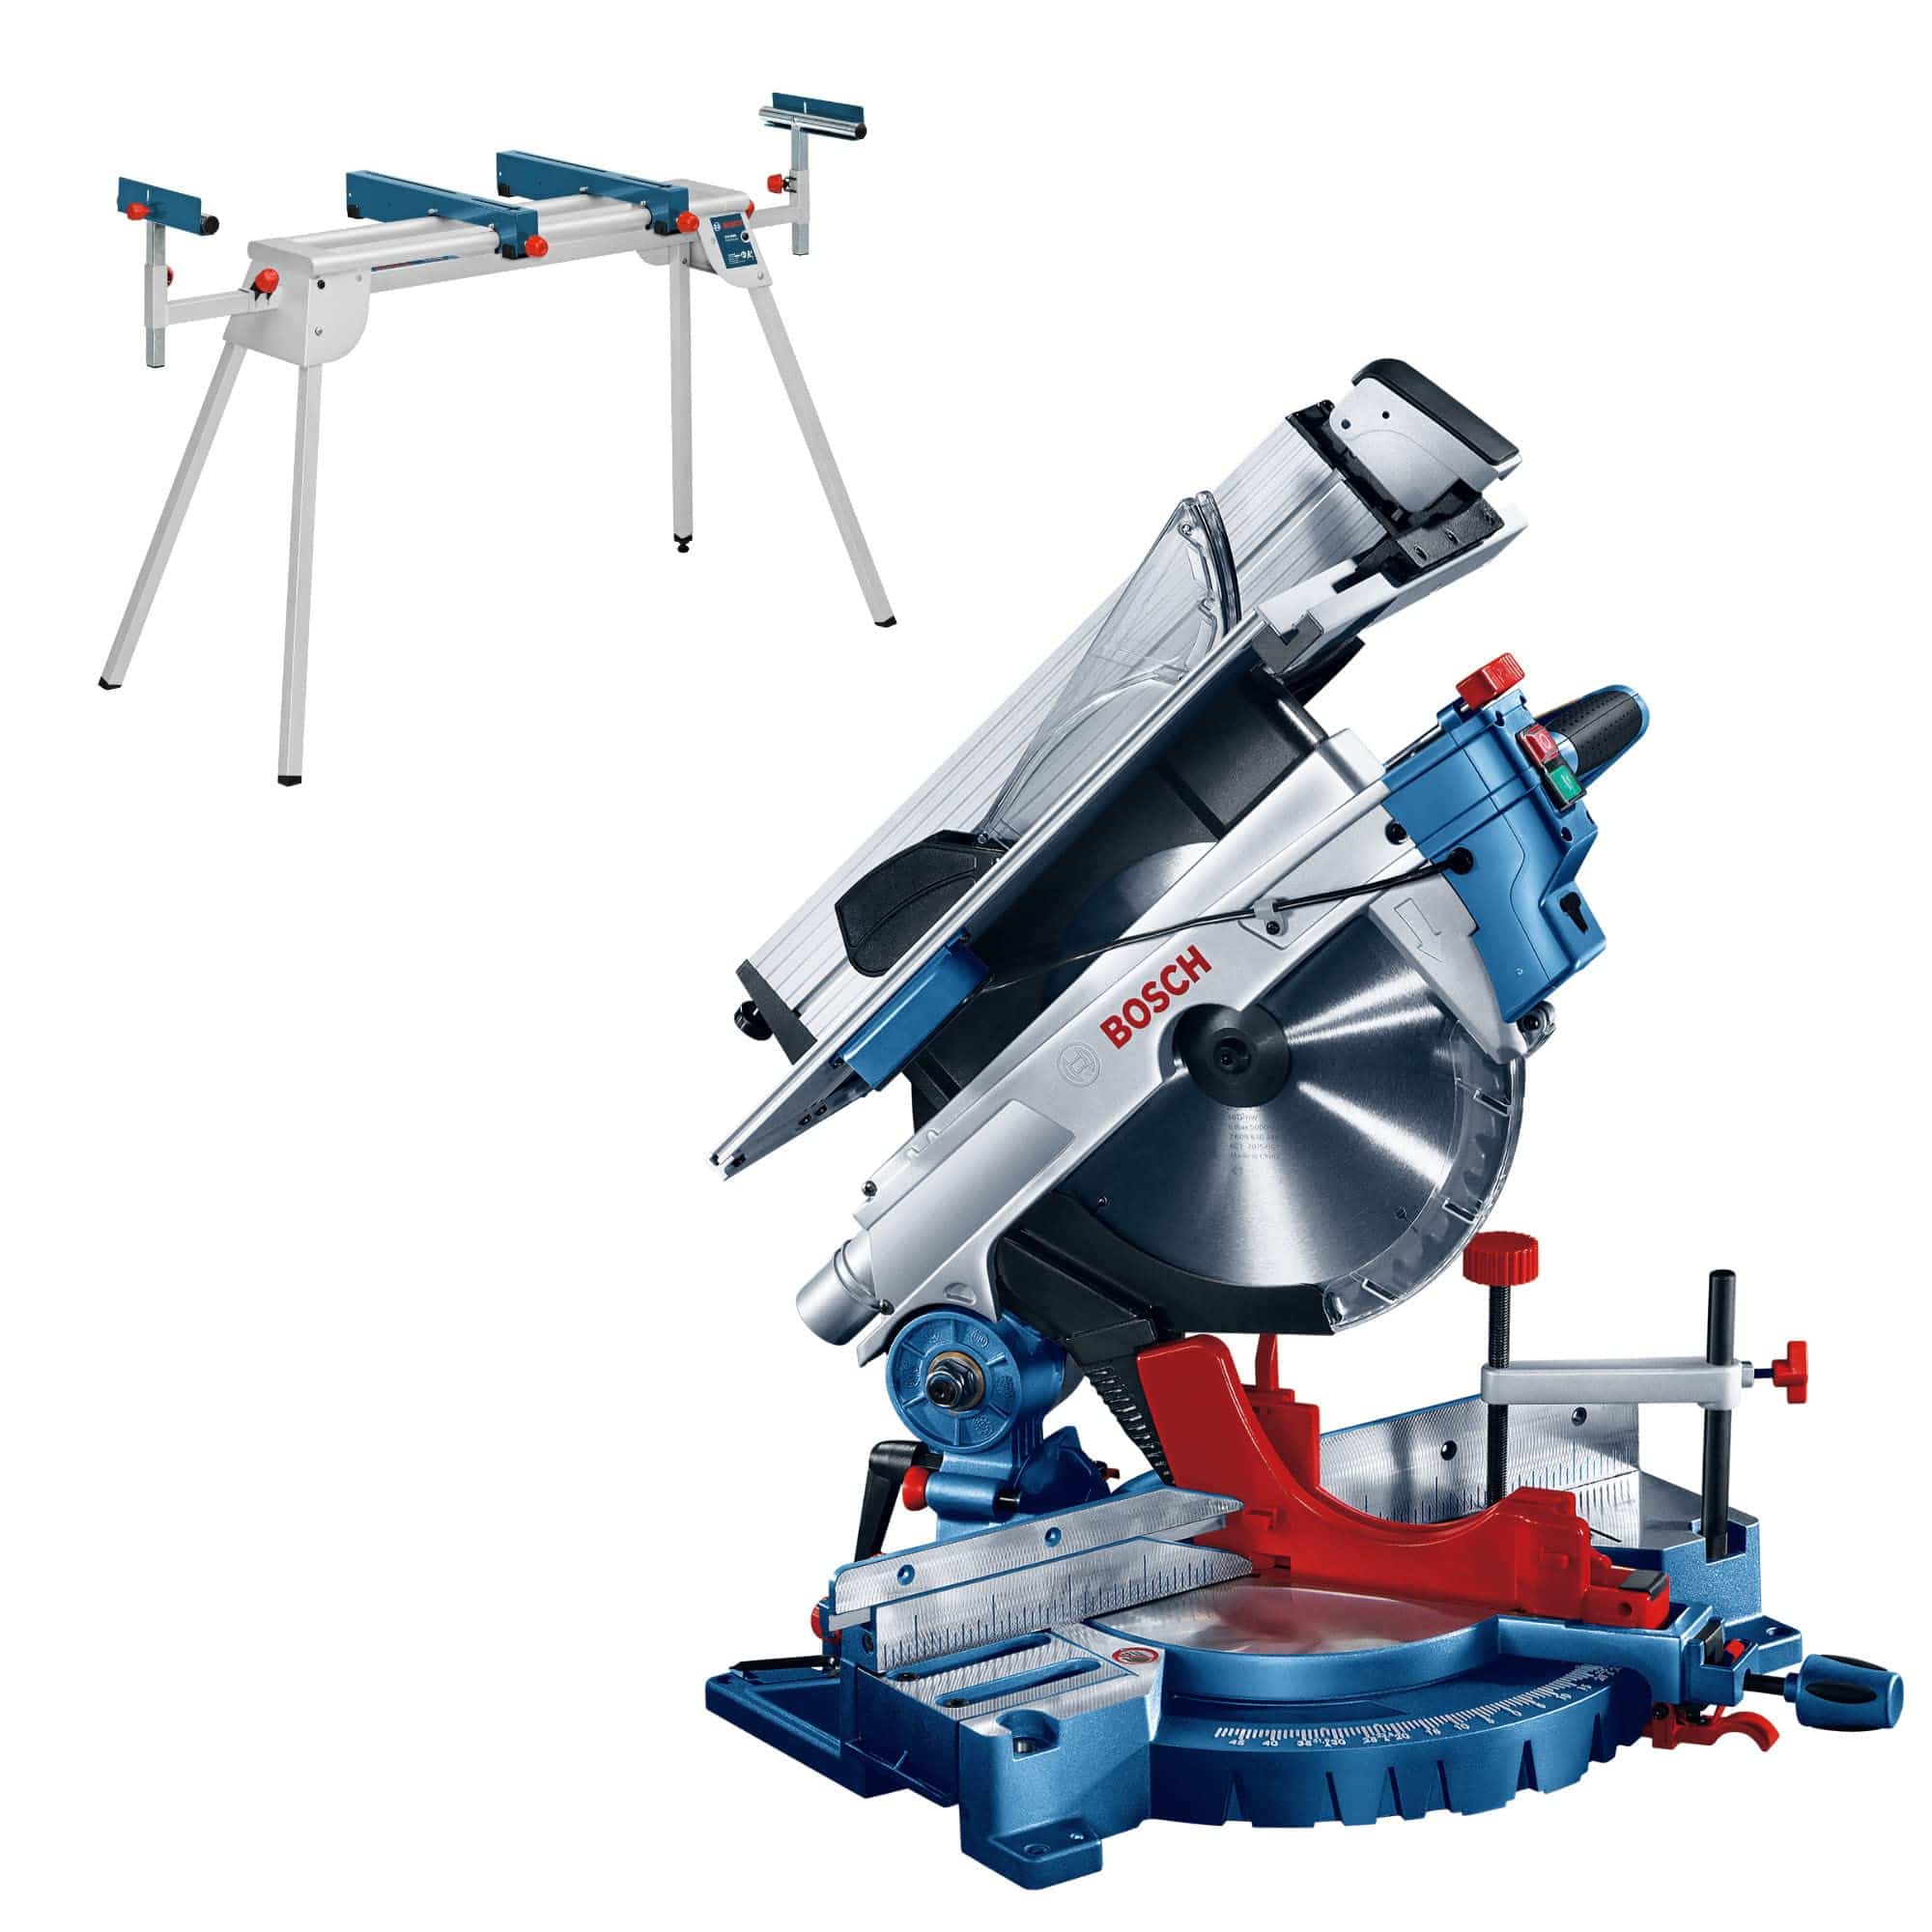 Experience versatility and precision with the Bosch Combo Mitre Saw 1800W (GTM 12 JL) at SupplyMaster.store in Ghana. Bench & Stationary Tool Buy Tools hardware Building materials